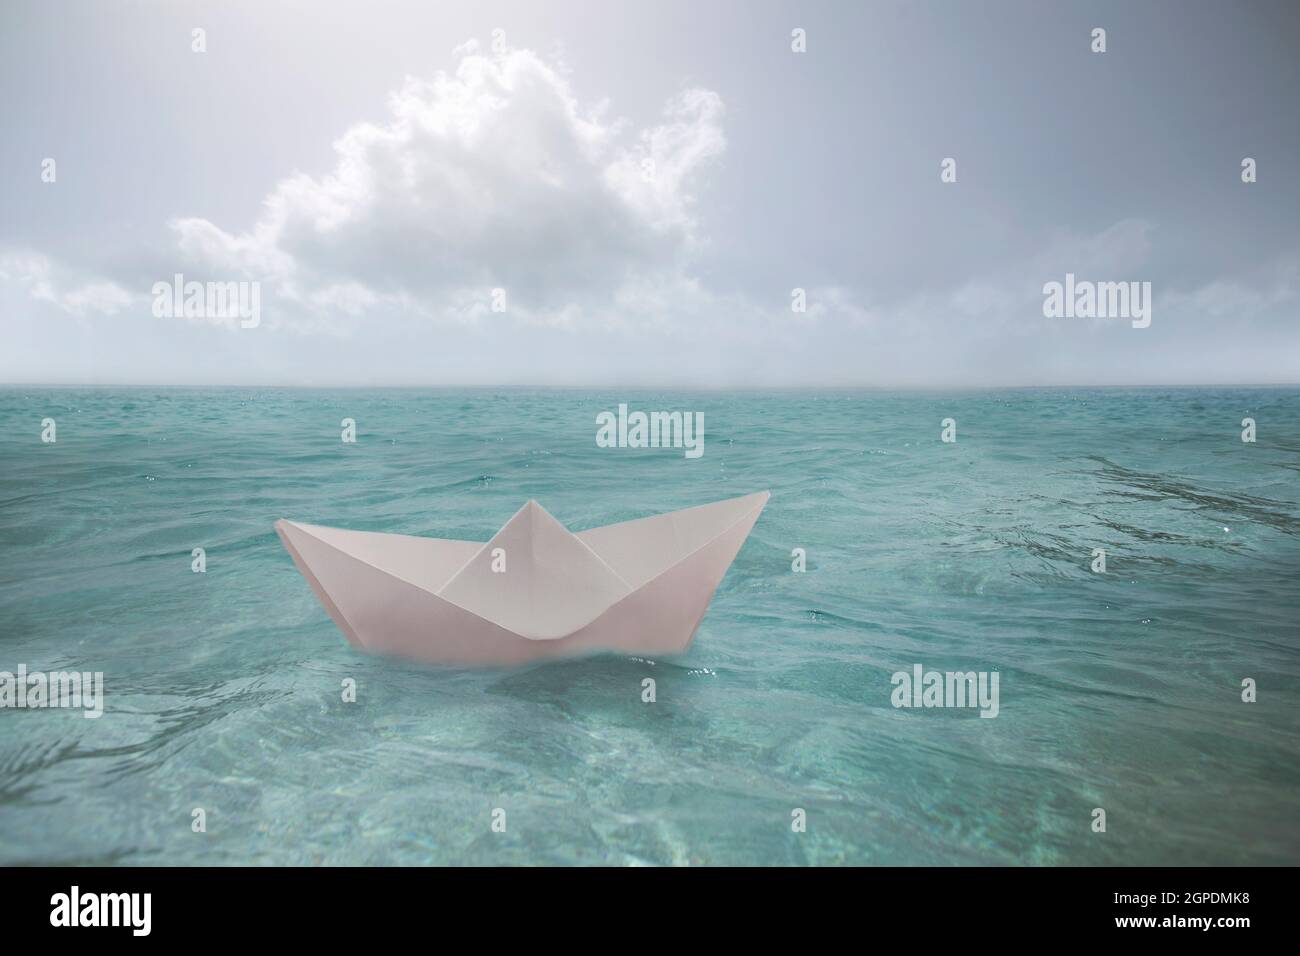 surreal paper boat travels alone in the infinite ocean Stock Photo